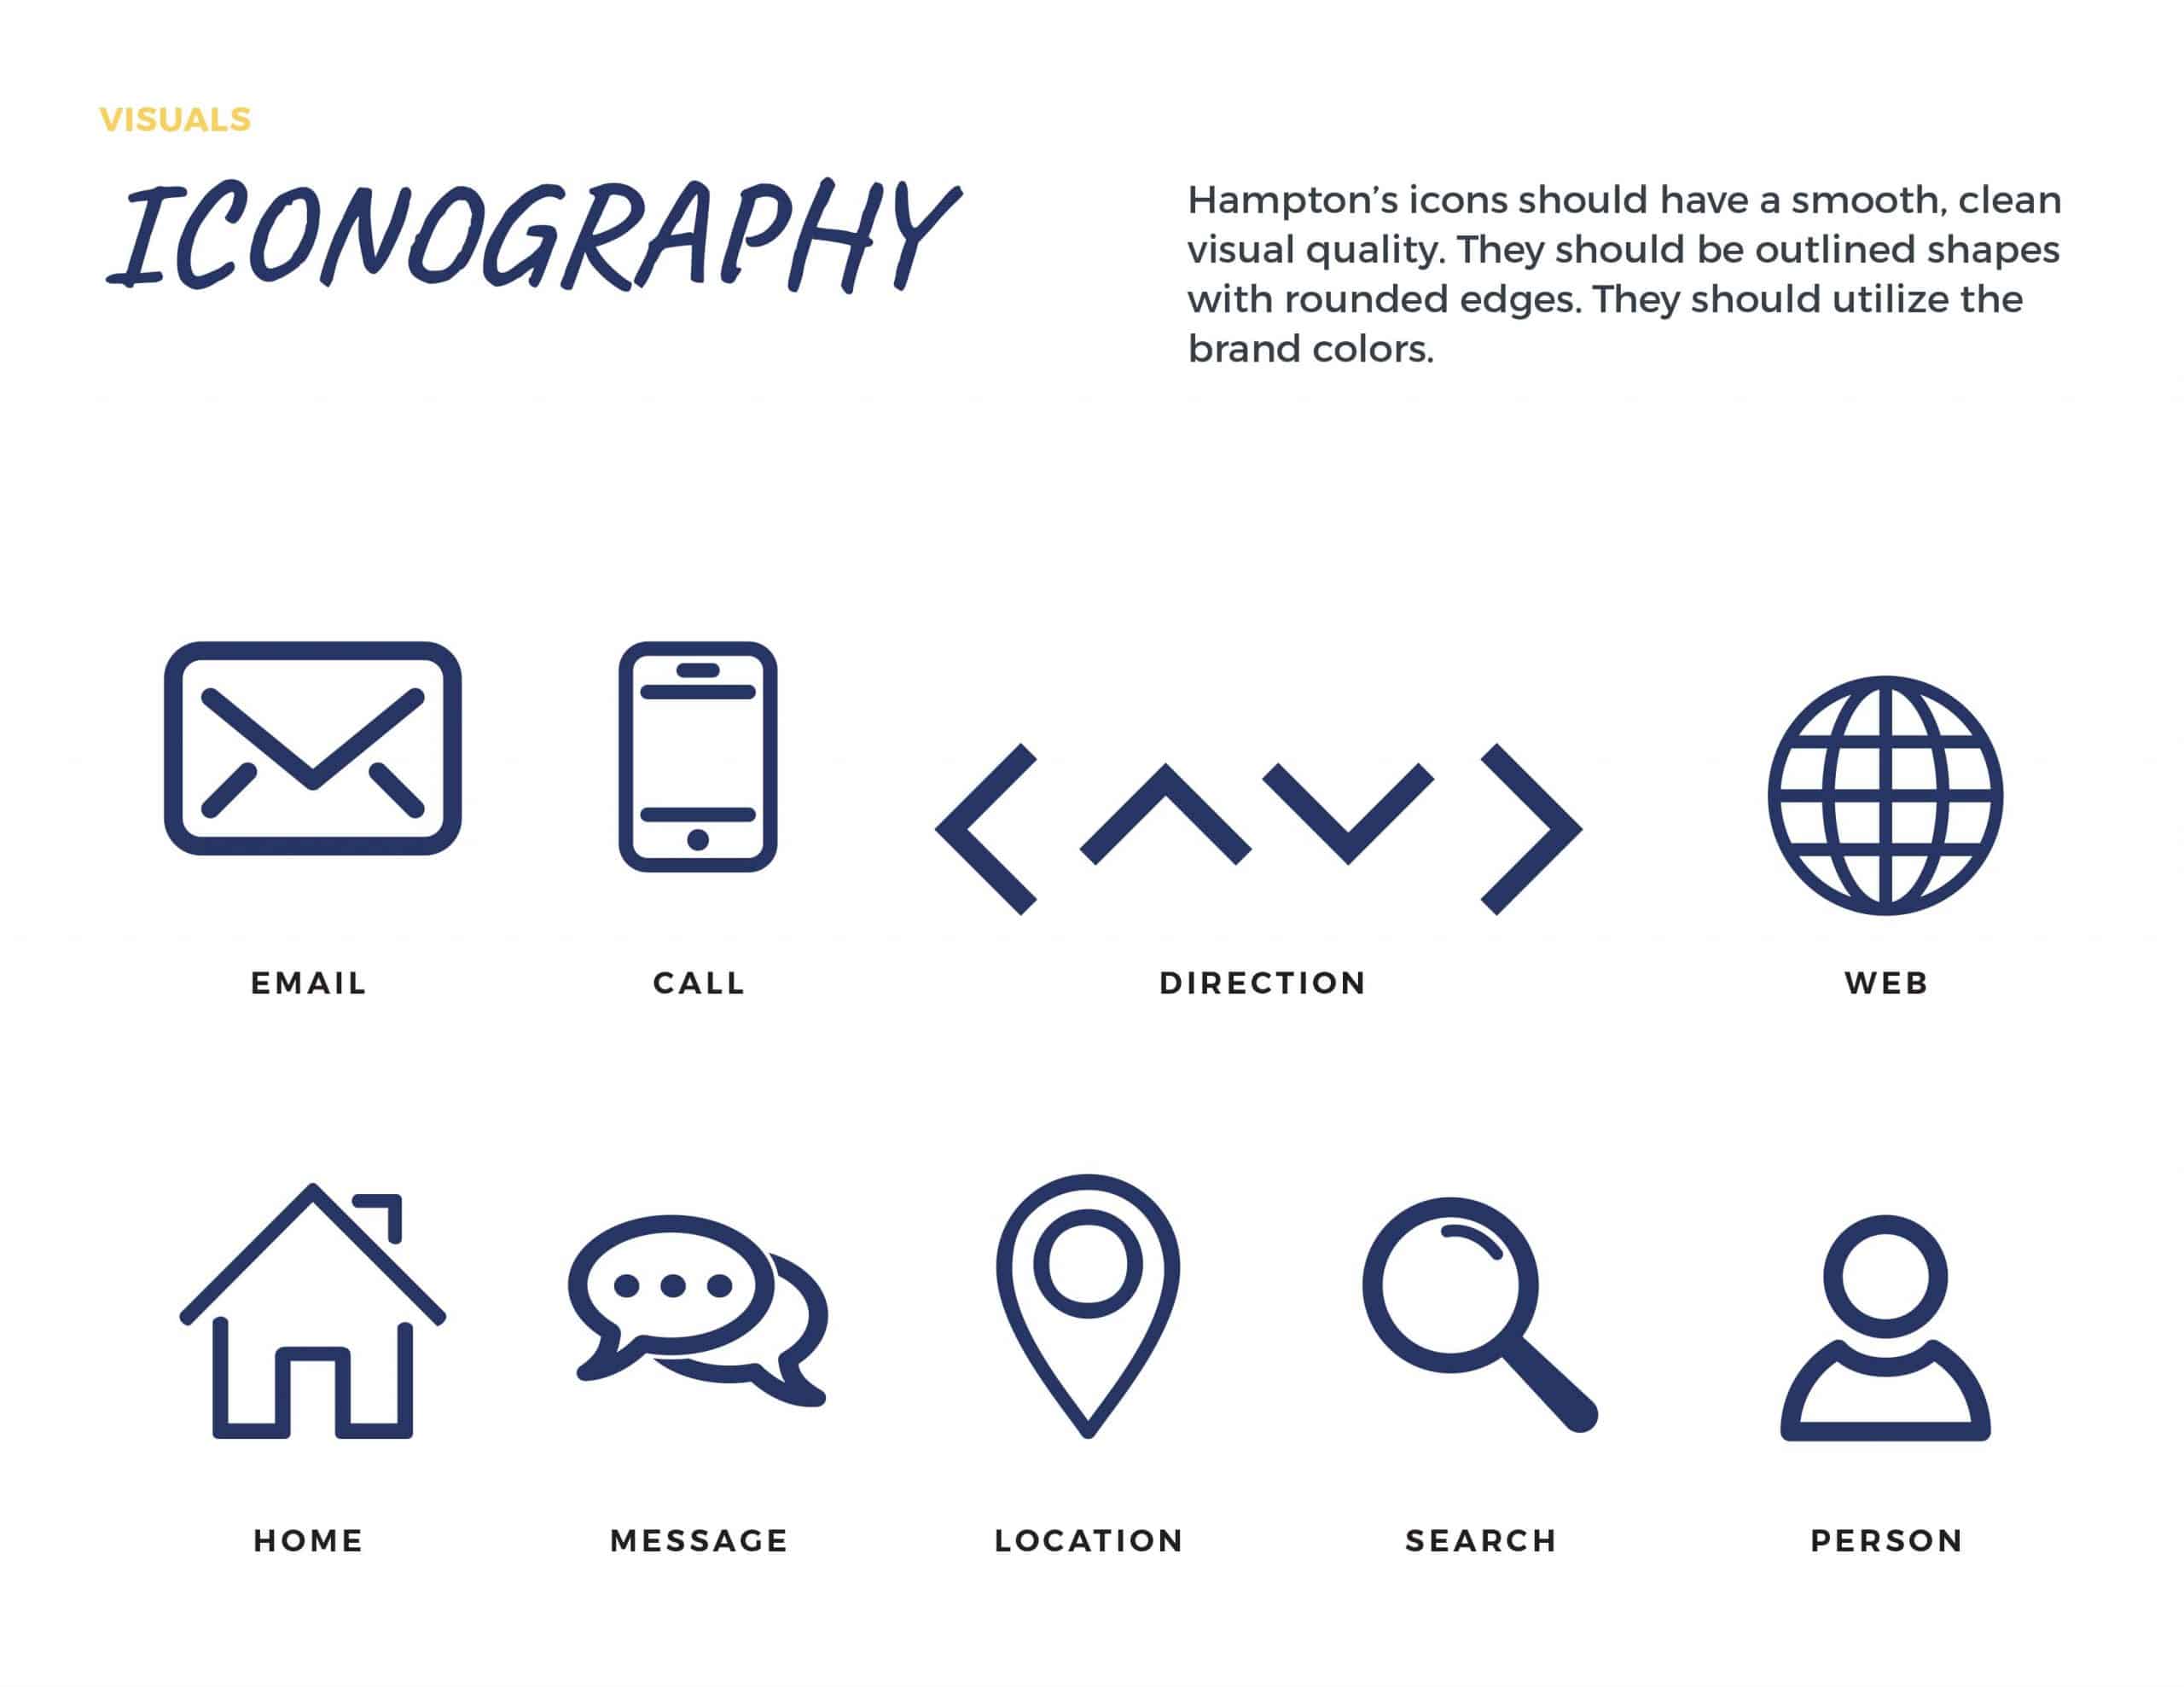 HDS Brand Guide - Iconography